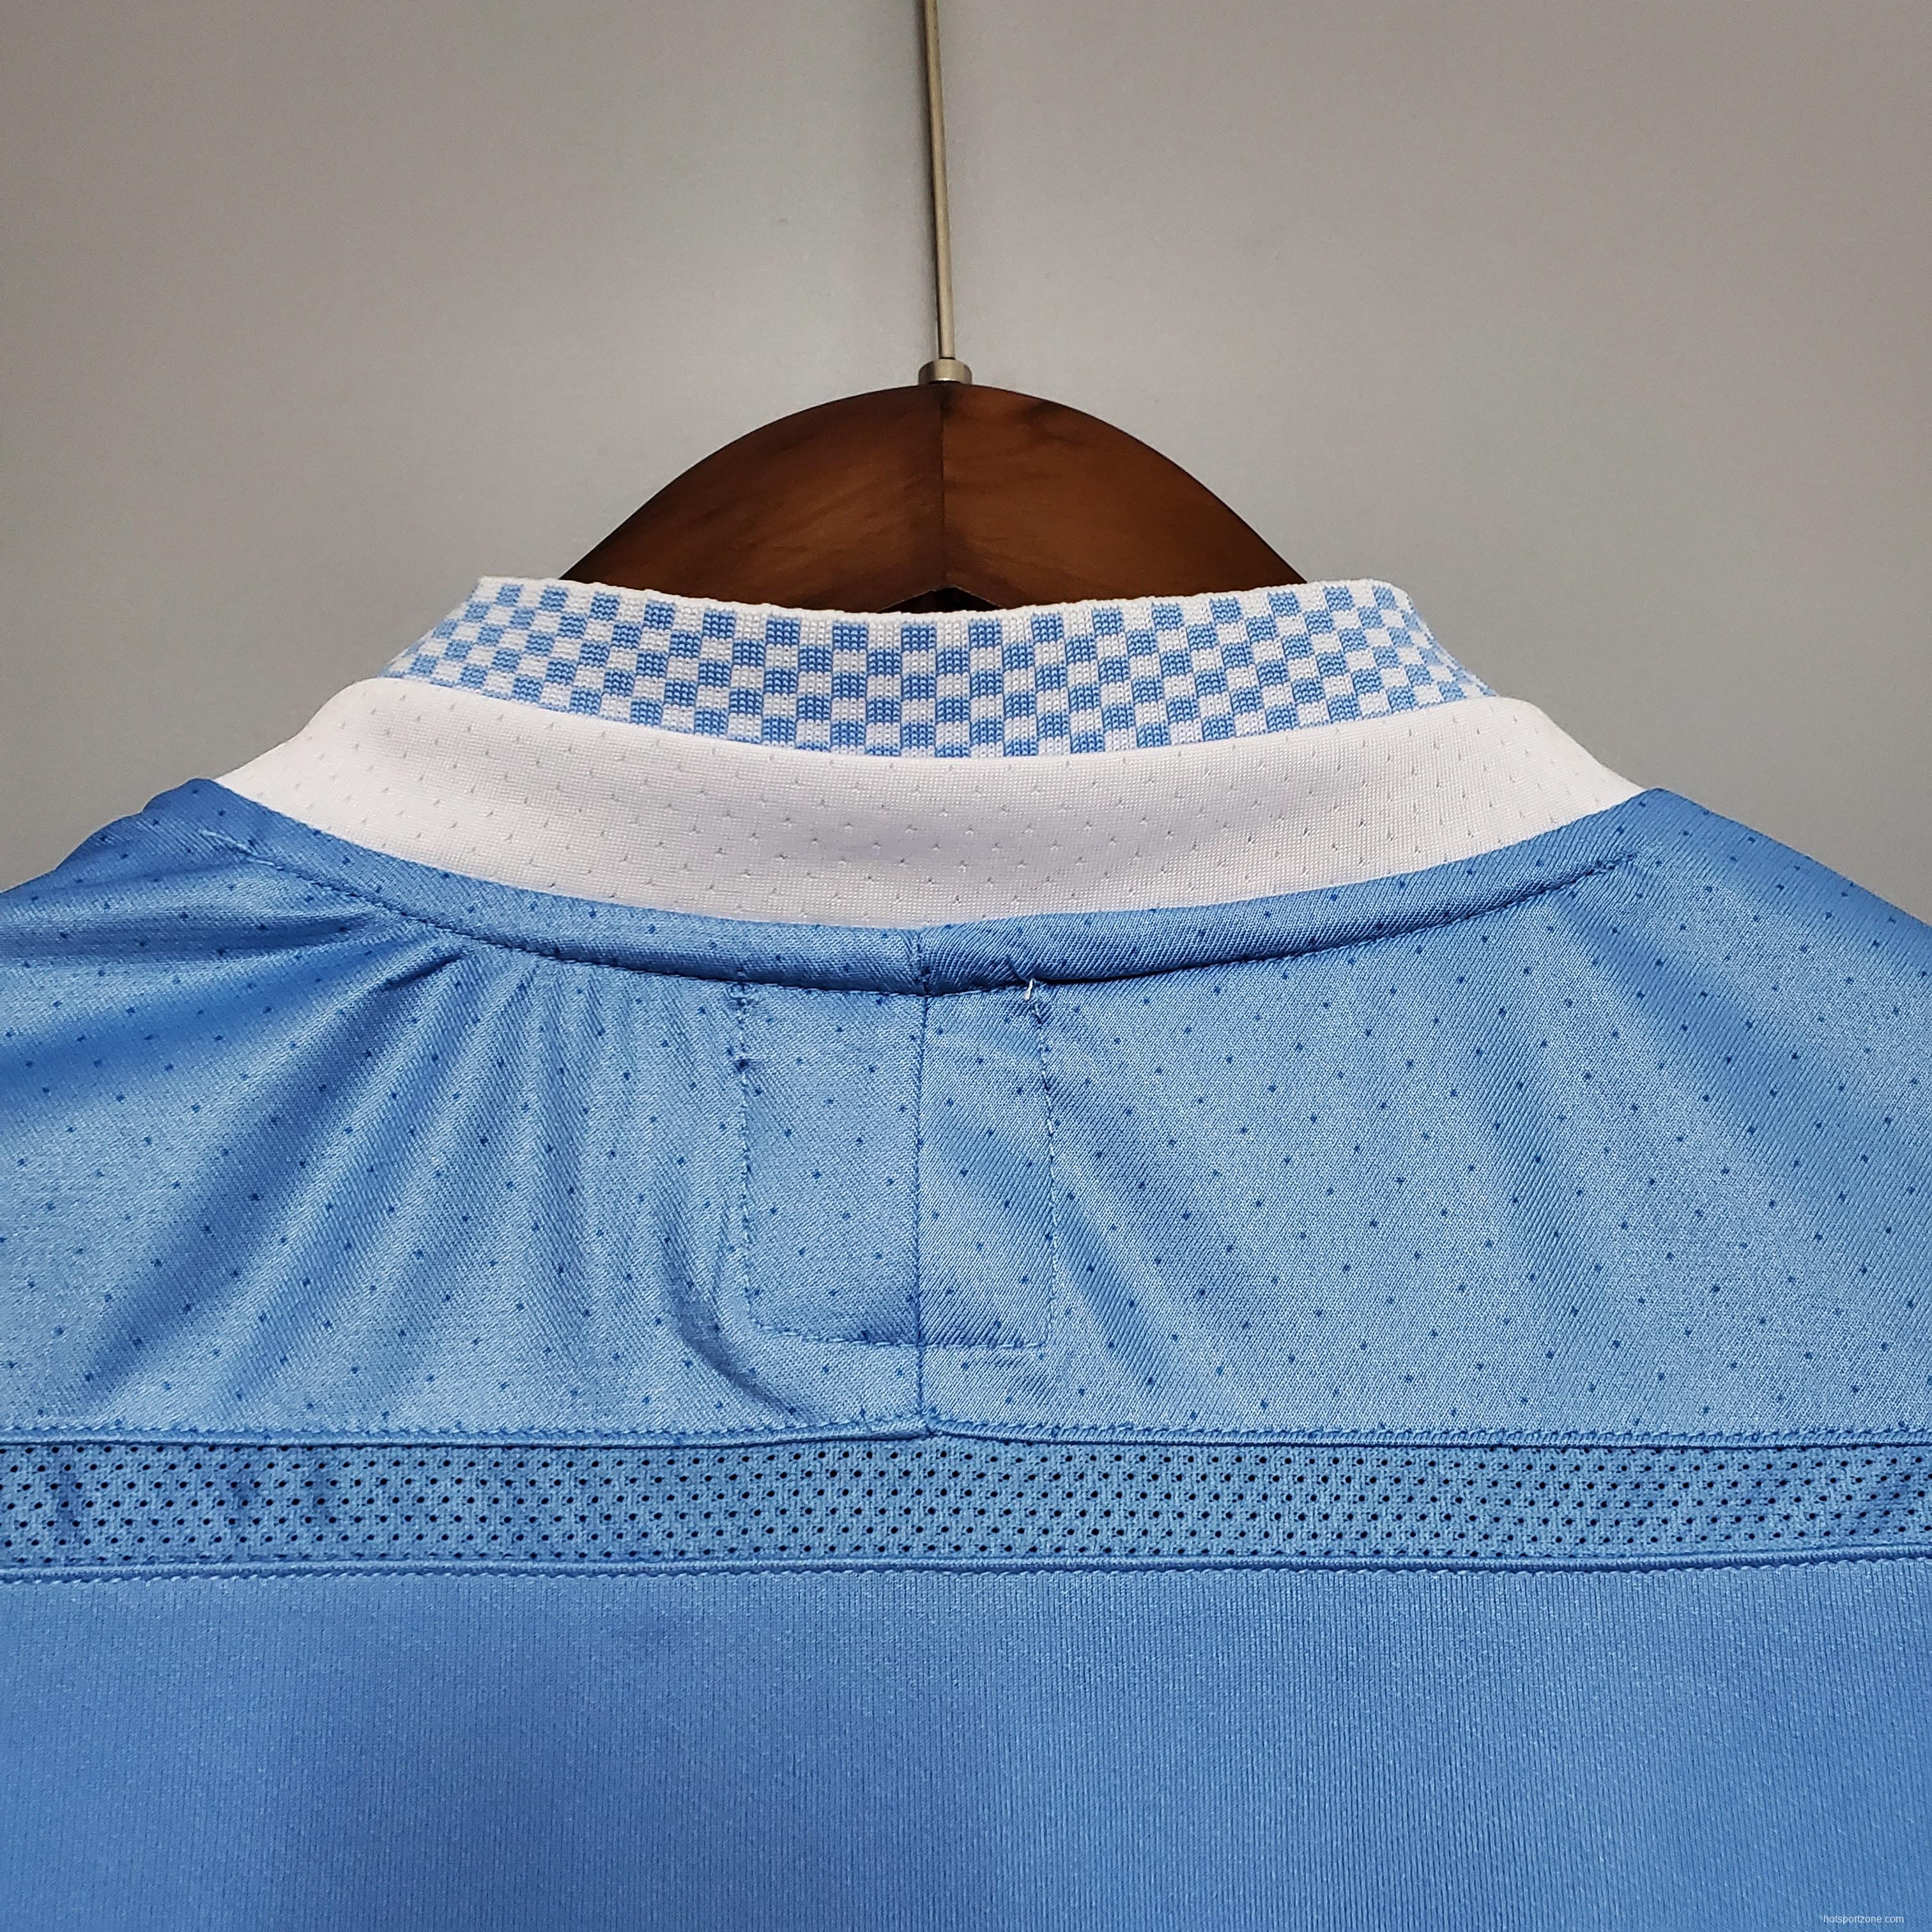 Retro Manchester City 11/12 home Soccer Jersey